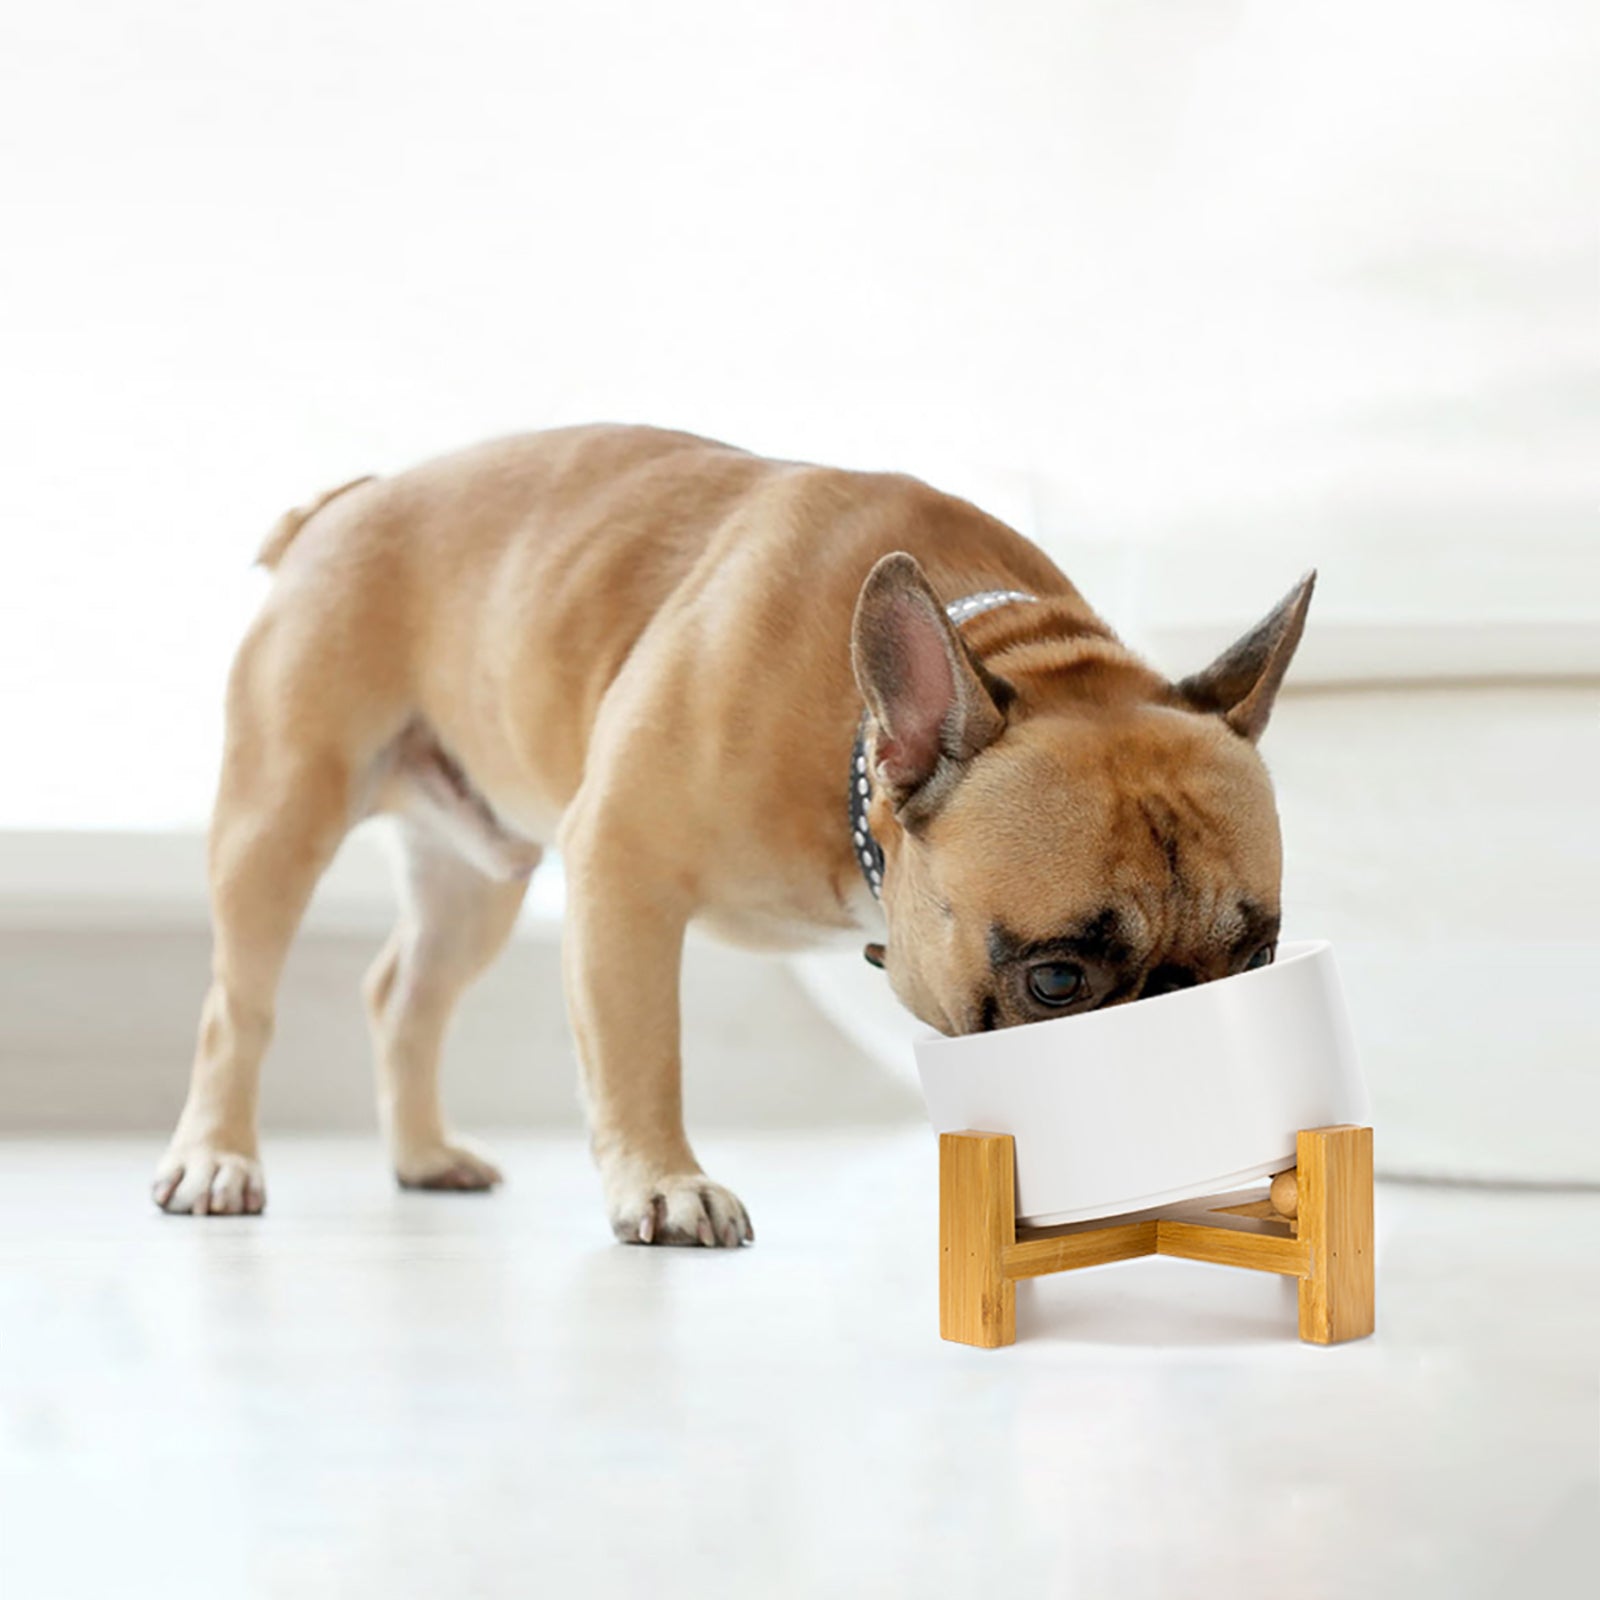 a bull dog eating in the single 15° tilted withe dog bowl